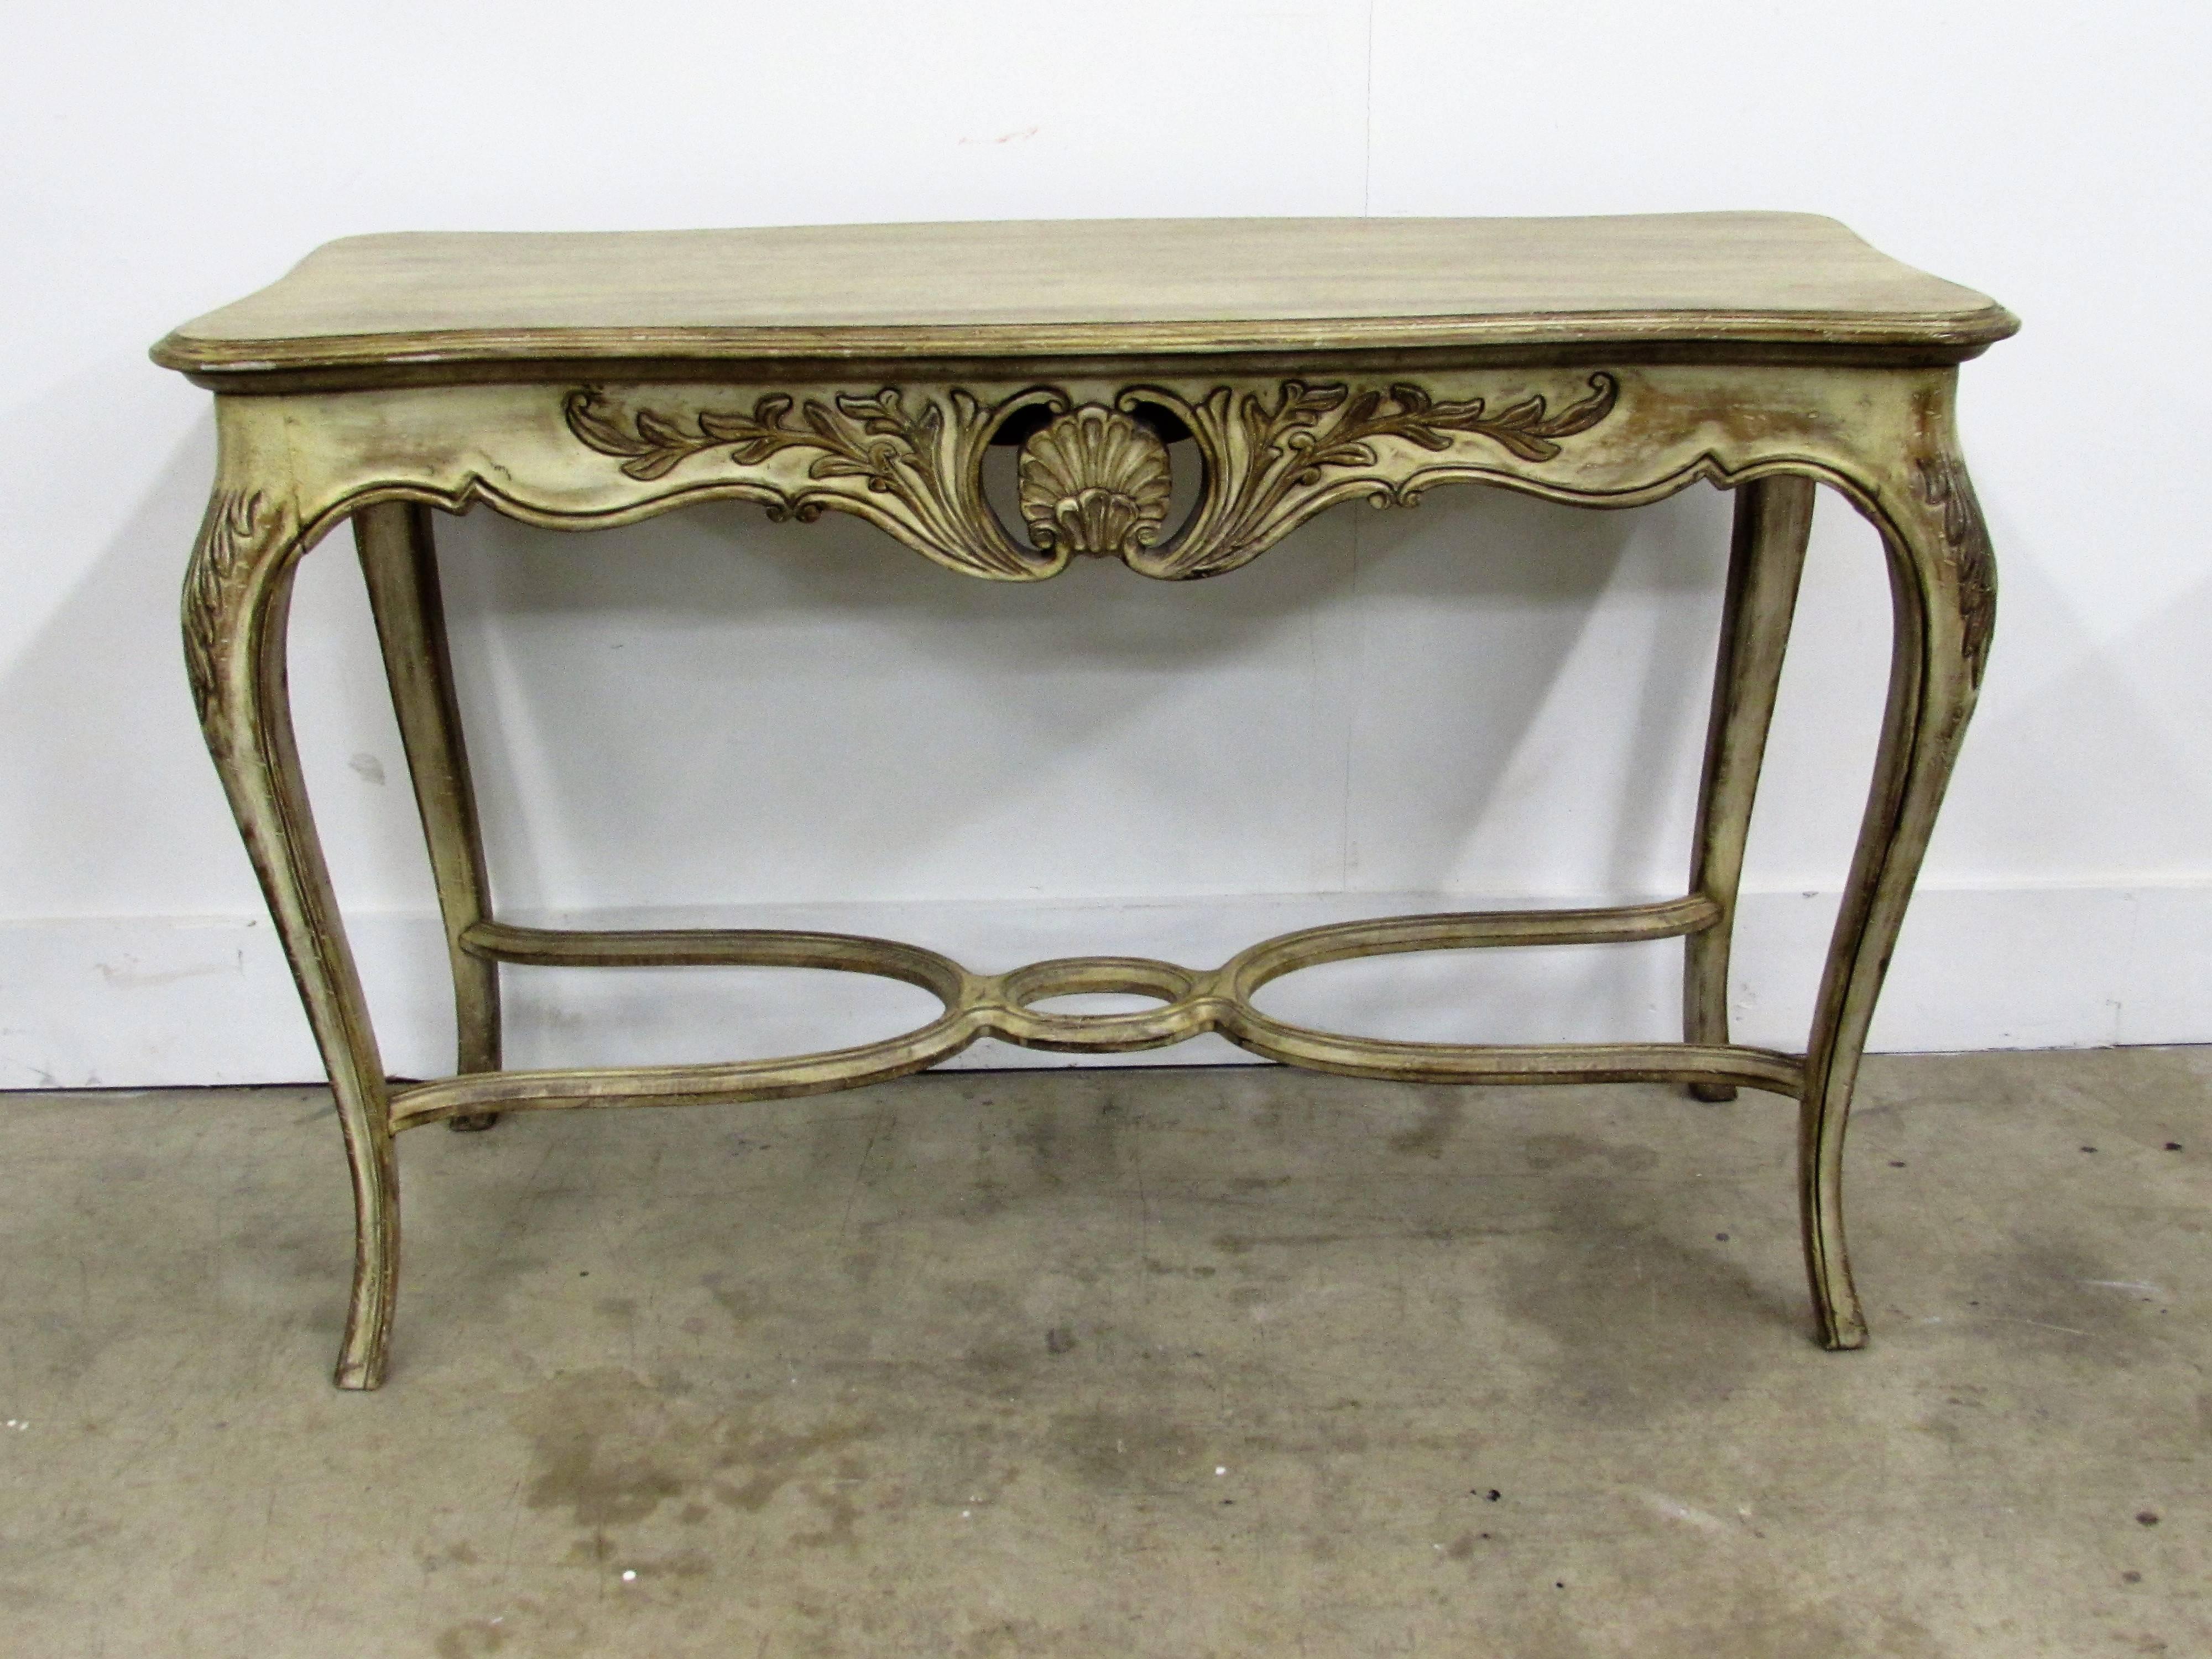 Louis XV style carved wood console table with shell motif and acanthus carved cabriolet legs antiqued, glazed and distressed, ending with a modern stretcher.